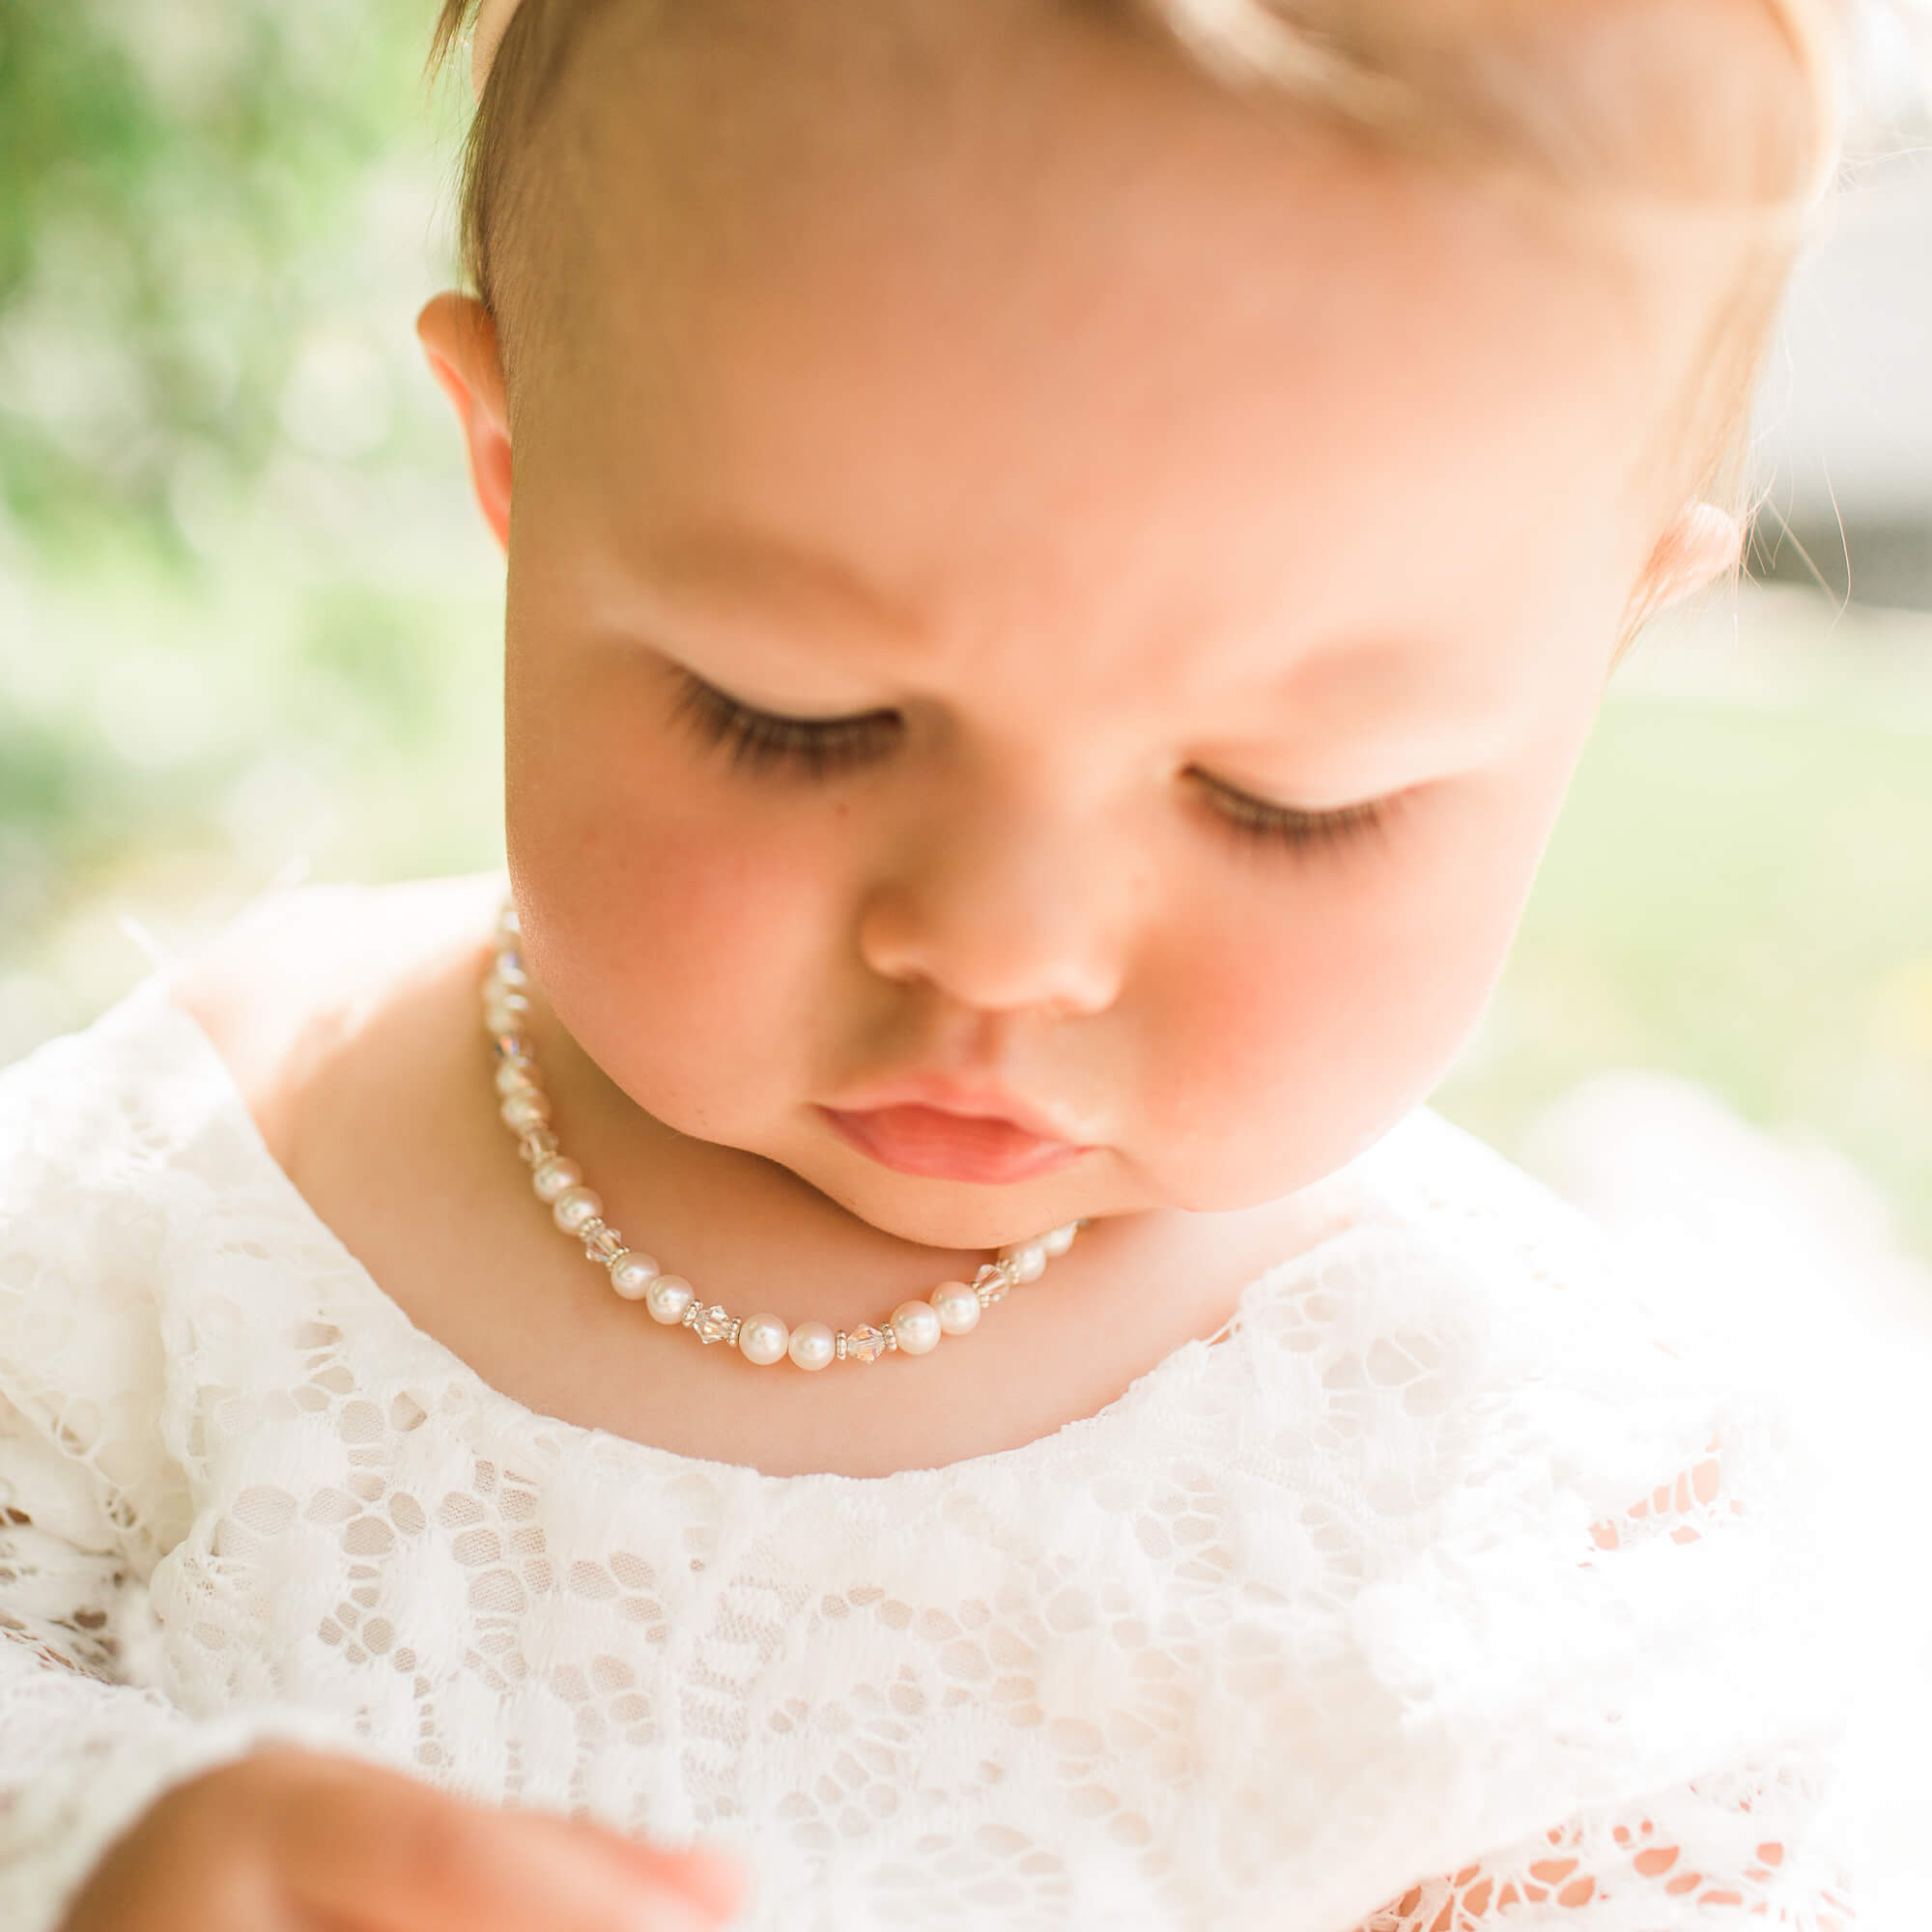 Start Your Little Girl's Pearl Jewelry Journey - Pure Pearls